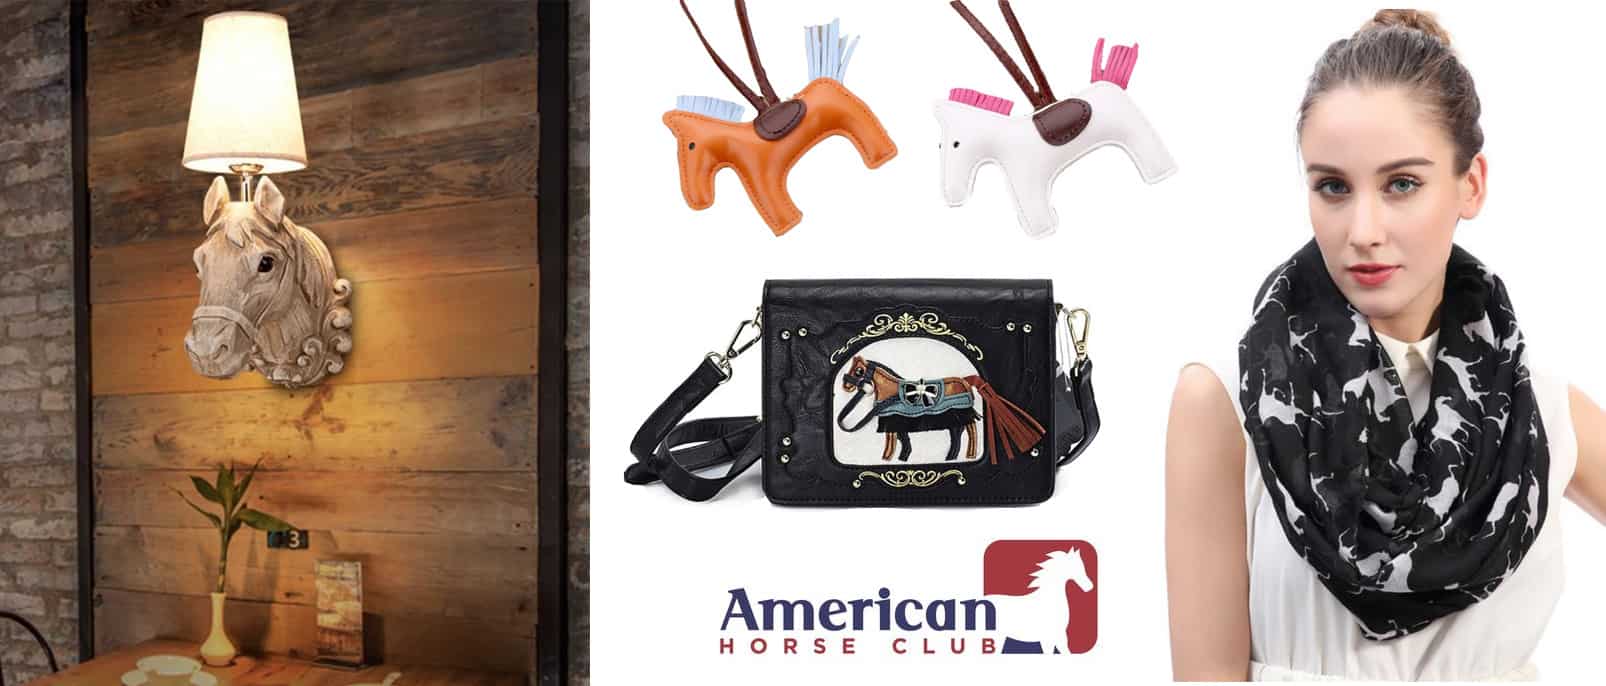 6 Top Equestrian Gifts & Accessories from American Horse Club